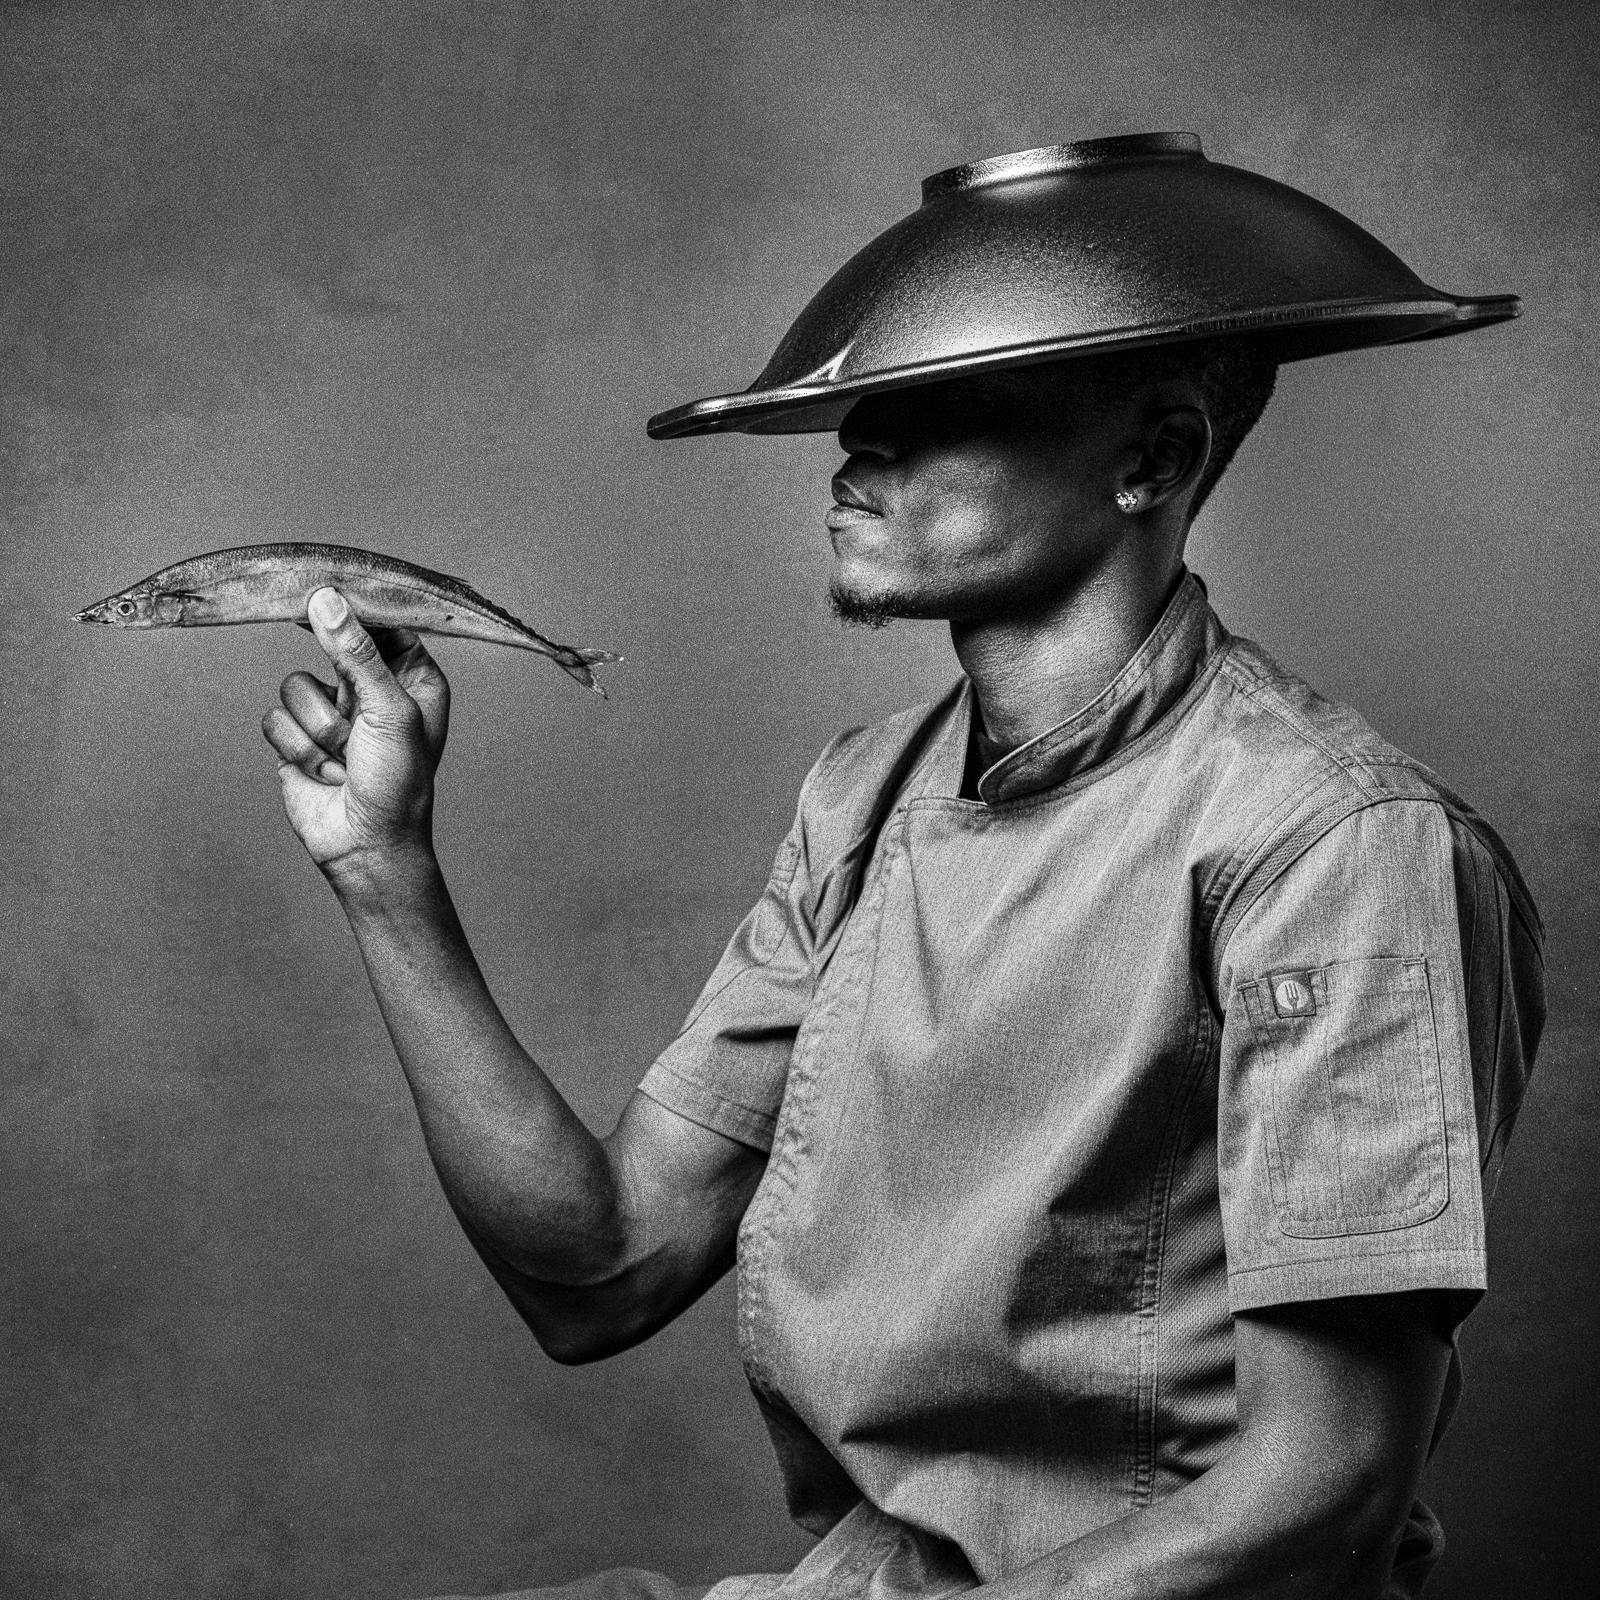 Shine Huang Black and White Photograph - Tinker, Chef, Fish. Portrait Black and White Print